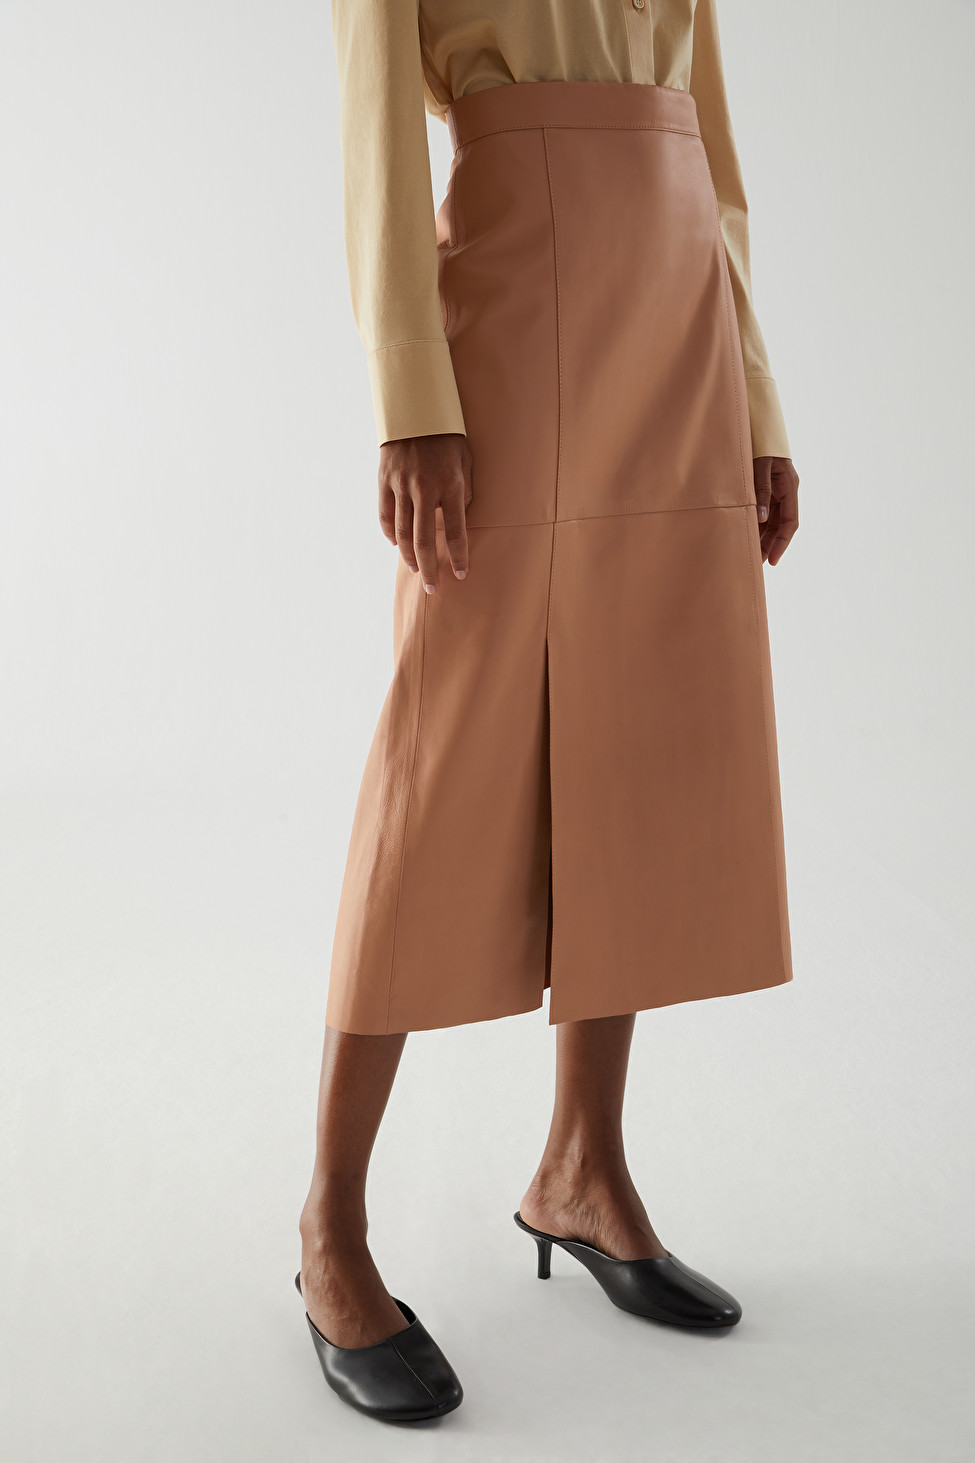 COS Nappa Leather A-Line Midi Skirt